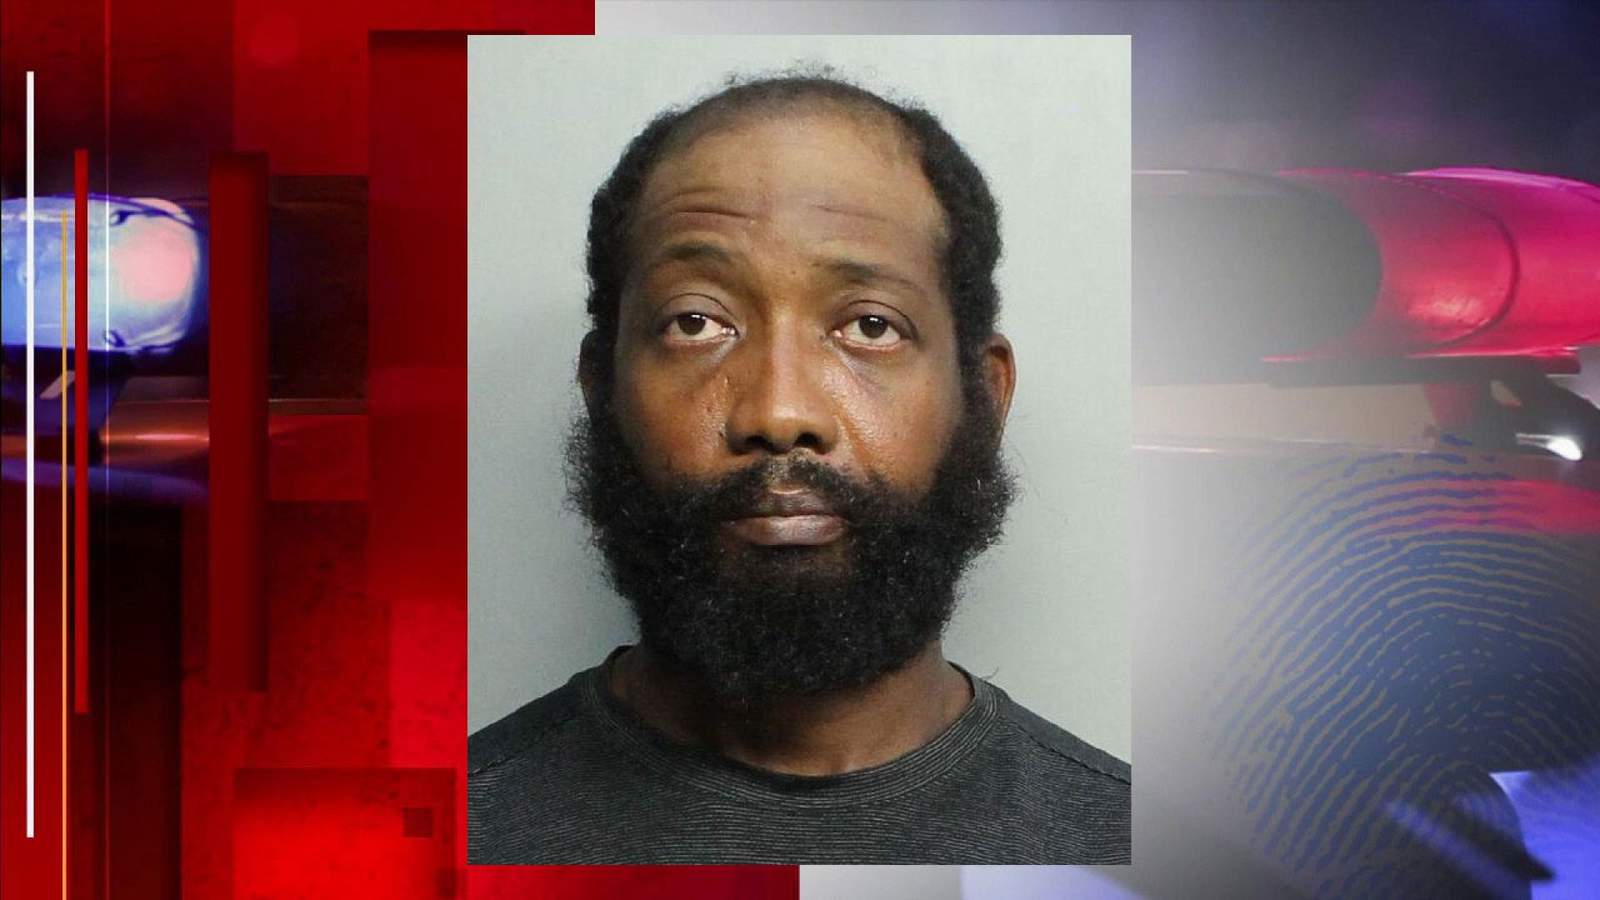 Man faces charges in work-related bus stop shooting killing 1, injuring 2